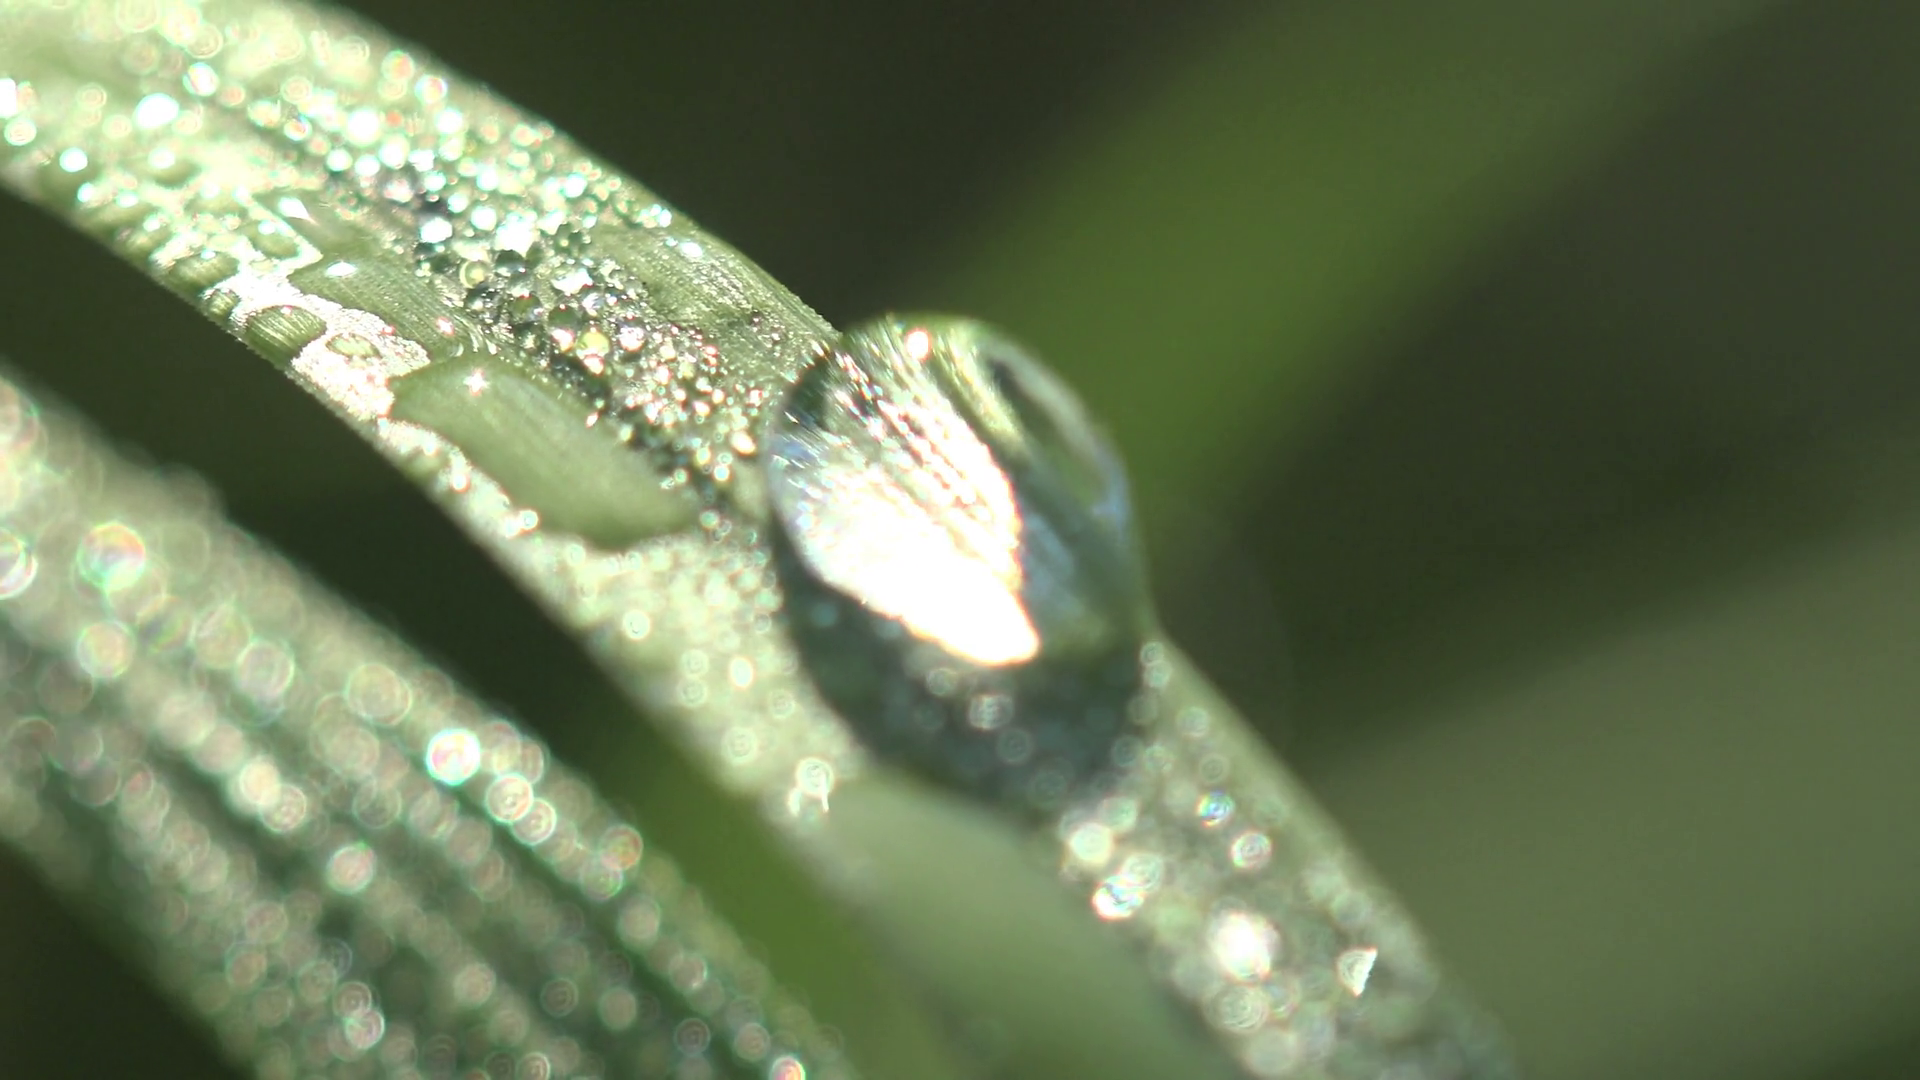 Fantastic Big Dew drop on leaf of green plant in early morning ...